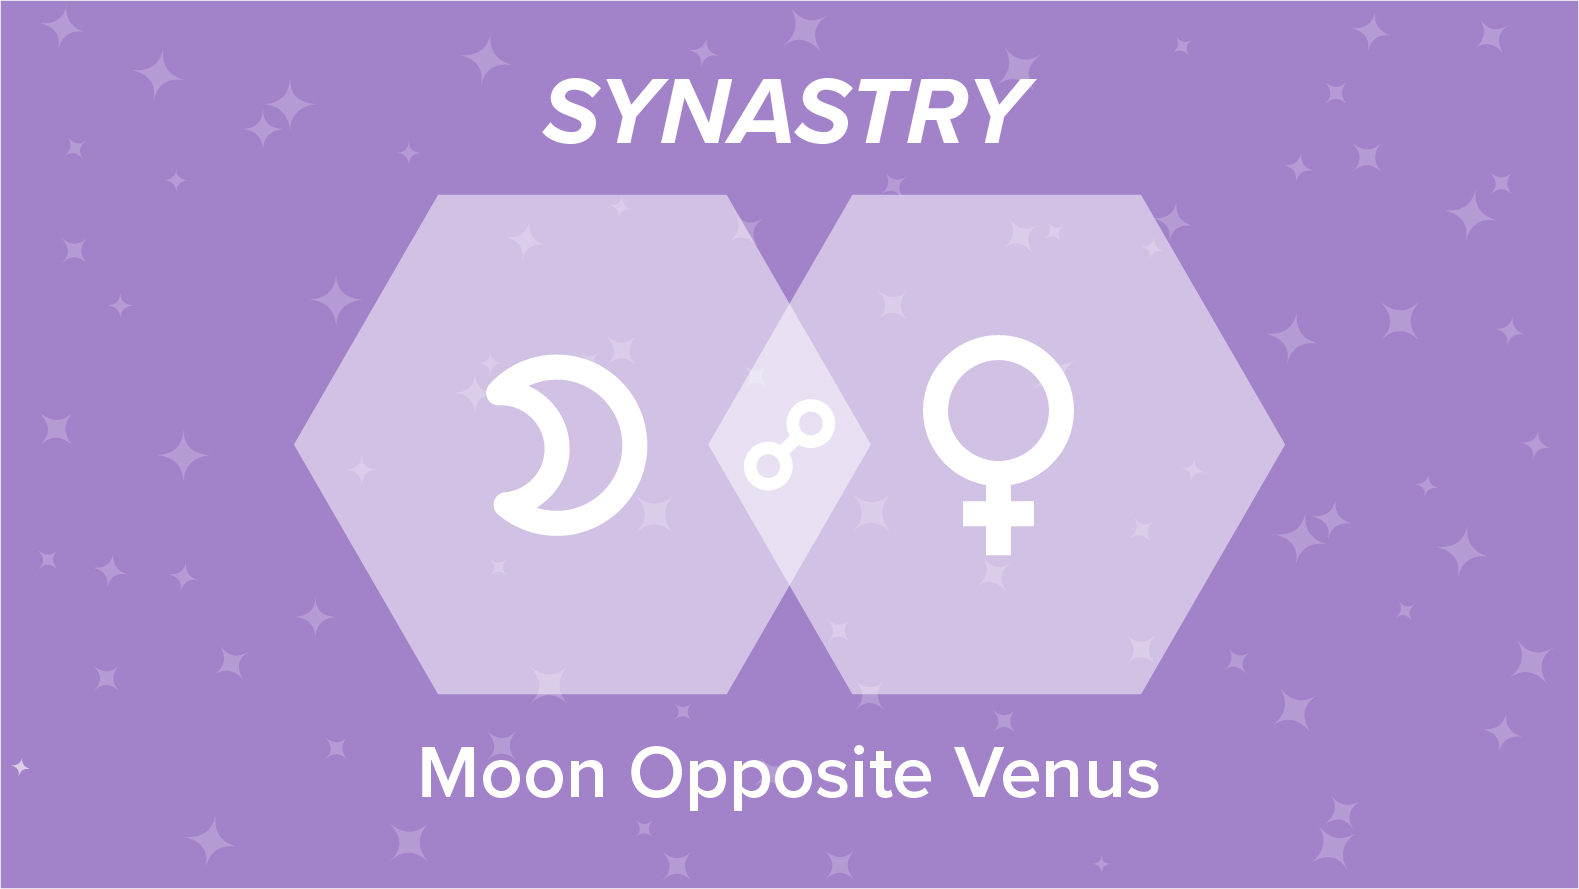 Moon Opposite Venus Synastry: Relationships and Friendships Explained